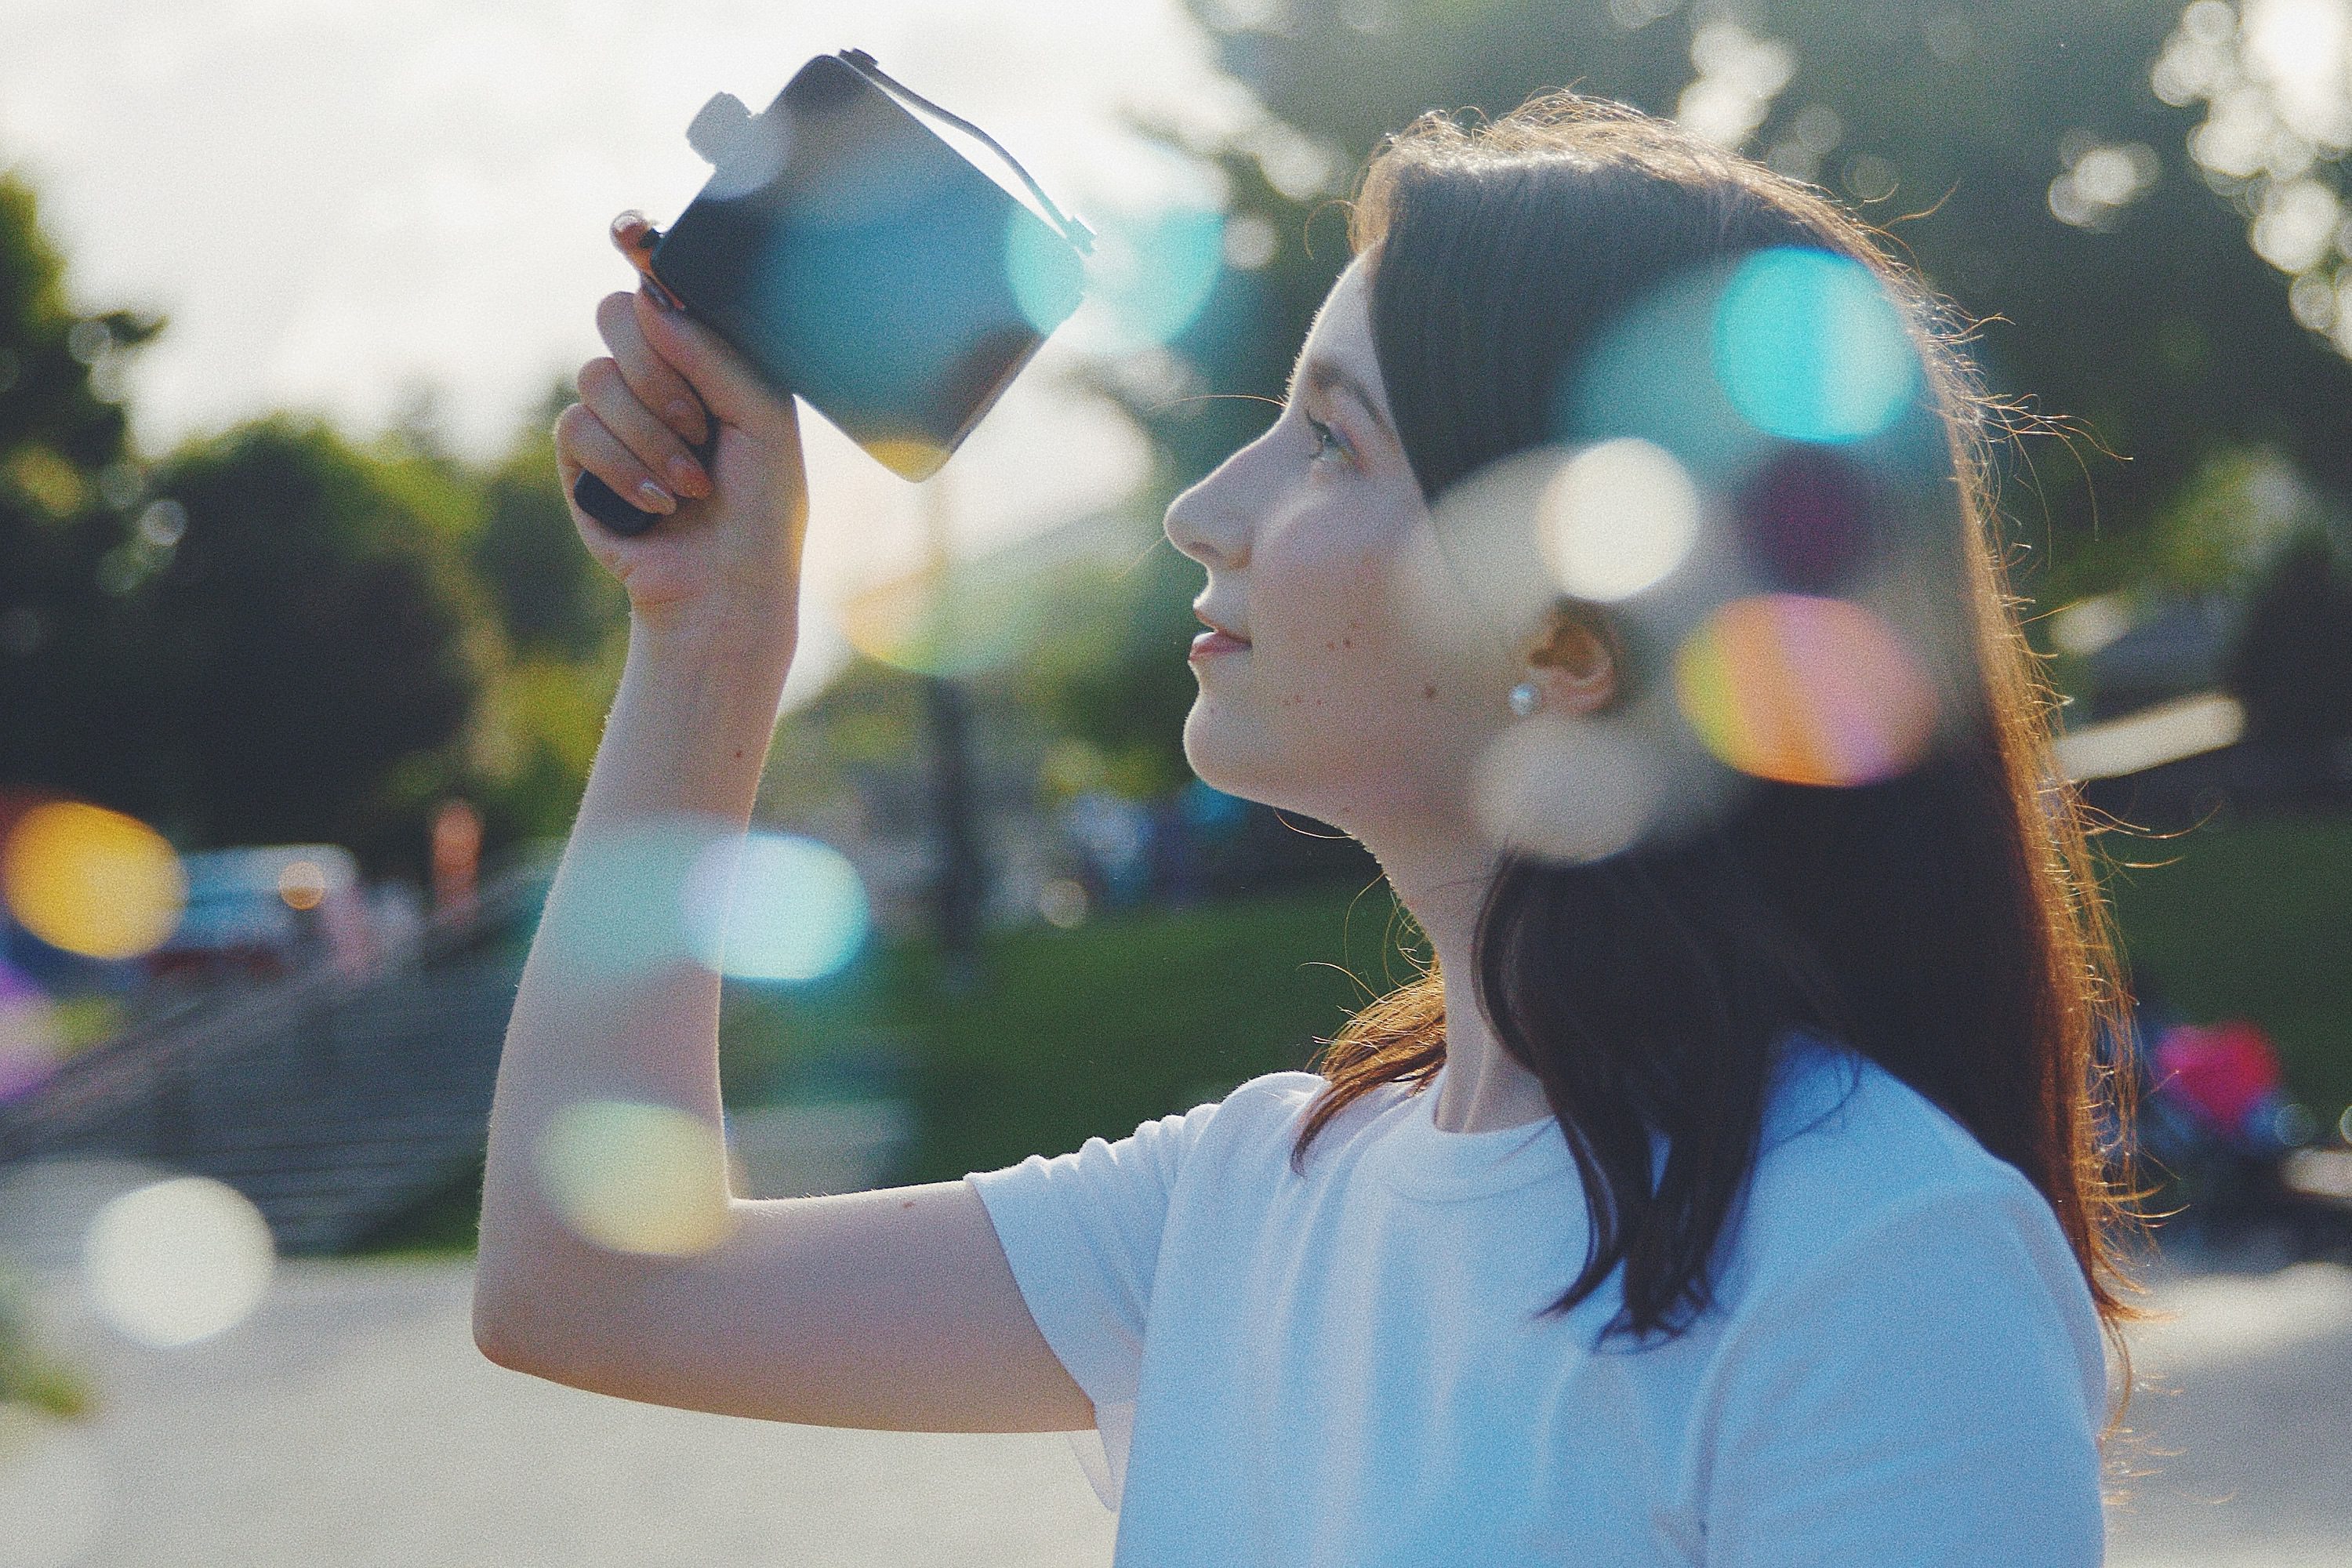 The Fragment 8 is a Super-8's Look and Feel Camera with a Modern 